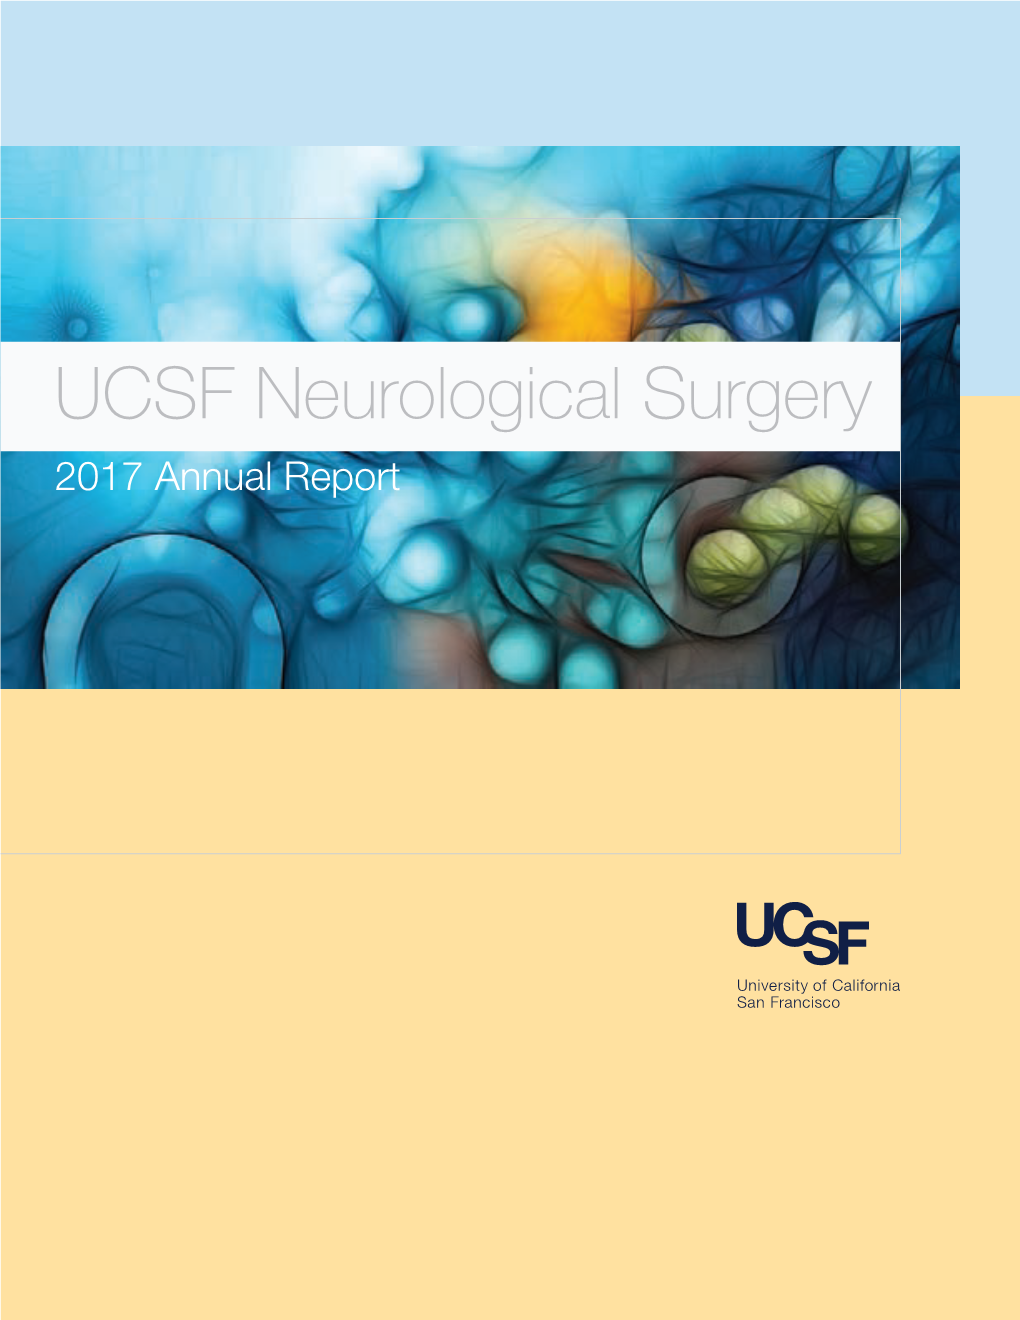 UCSF Neurological Surgery 2017 Annual Report Contents